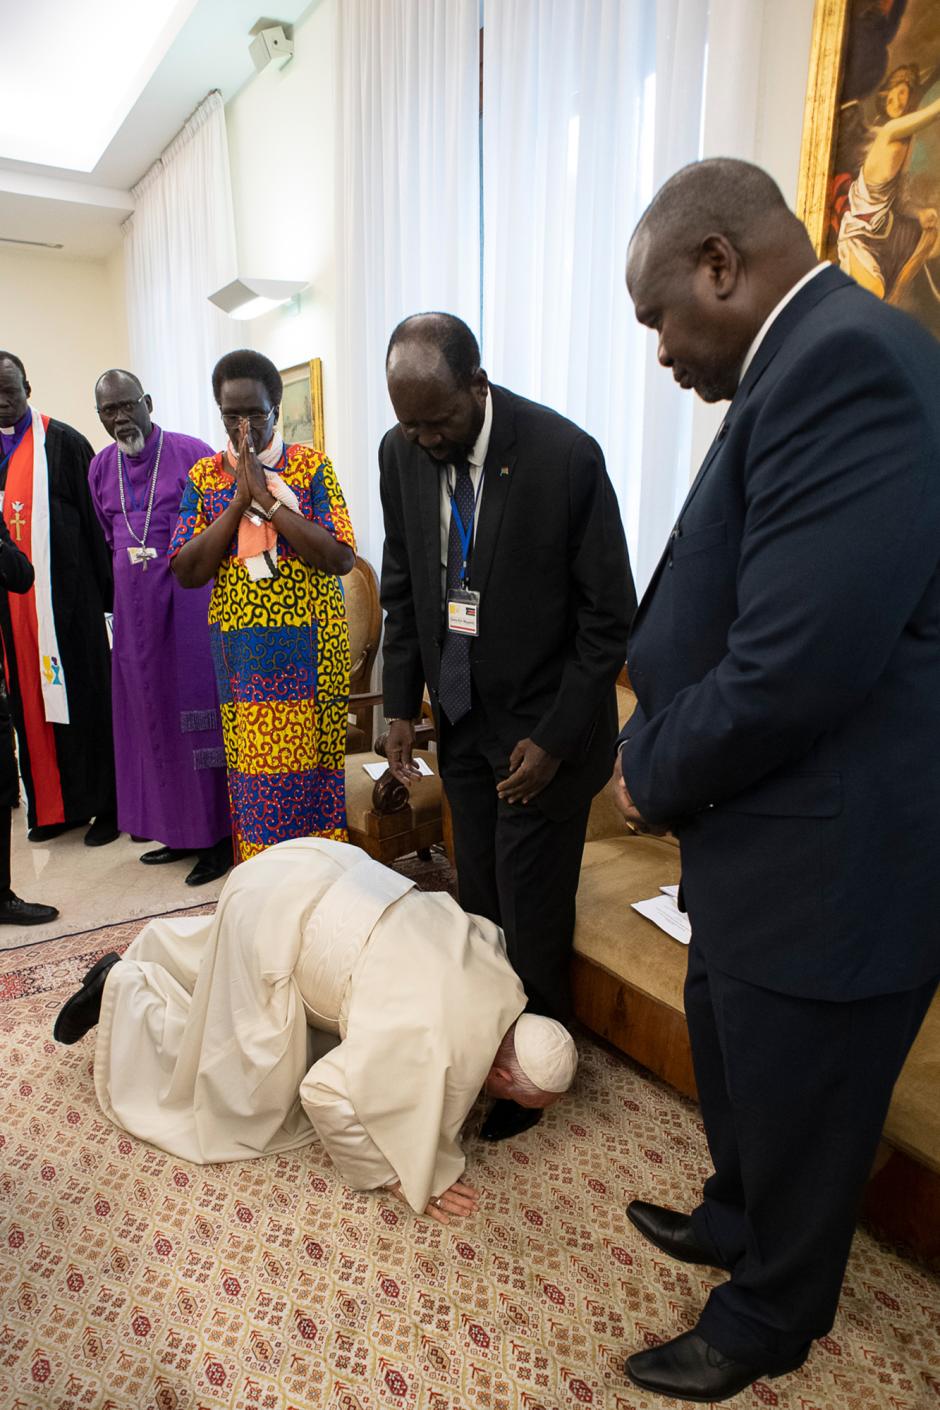 In this photo taken and released on April 11, 2019 by the Vatican Press Office, Vatican Media, Pope Francis (Bottom) kneels to kiss the feet of South Sudan's President Salva Kiir Mayardit (C) and South Sudan opposition leader Riek Machar (R) at the Pope's Santa Marta residence in the Vatican. - Pope Francis on April 11 knelt and kissed the feet of leaders of South Sudan at the end of a two-day retreat to help them solidify a peace agreement. (Photo by Handout / VATICAN MEDIA / AFP) / RESTRICTED TO EDITORIAL USE - MANDATORY CREDIT "AFP PHOTO / VATICAN MEDIA" - NO MARKETING NO ADVERTISING CAMPAIGNS - DISTRIBUTED AS A SERVICE TO CLIENTS ---